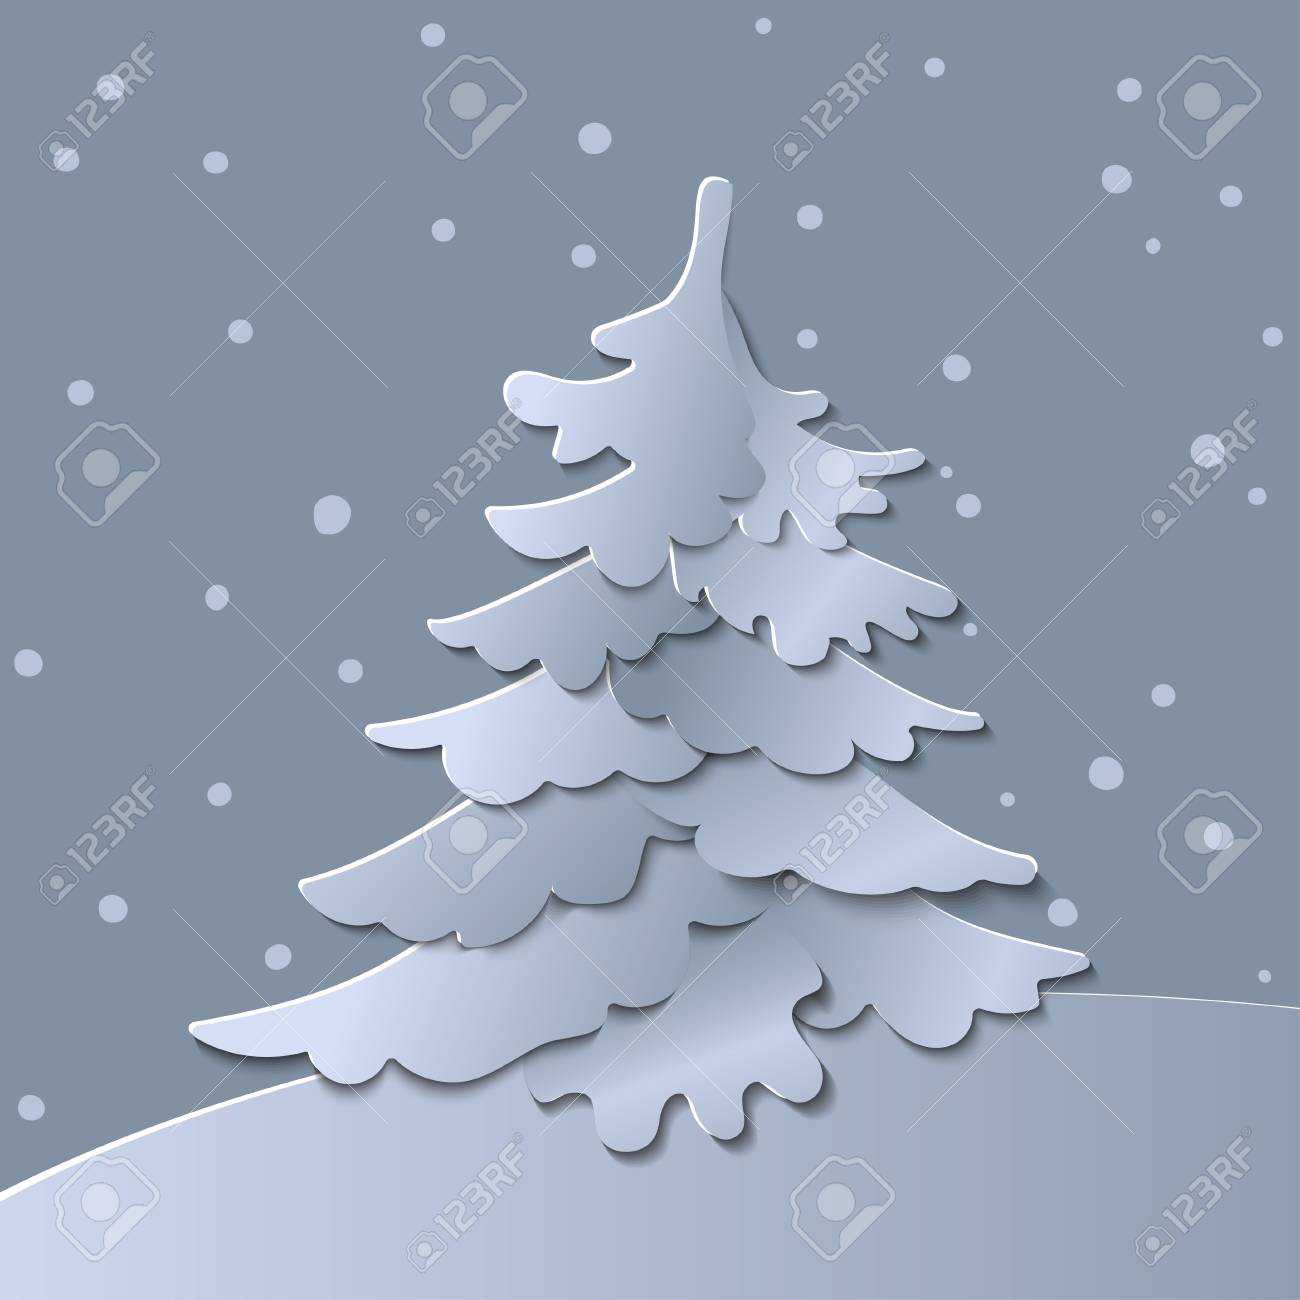 3D Abstract Paper Cut Illustration Of Christmas Tree. Vector.. In 3D Christmas Tree Card Template